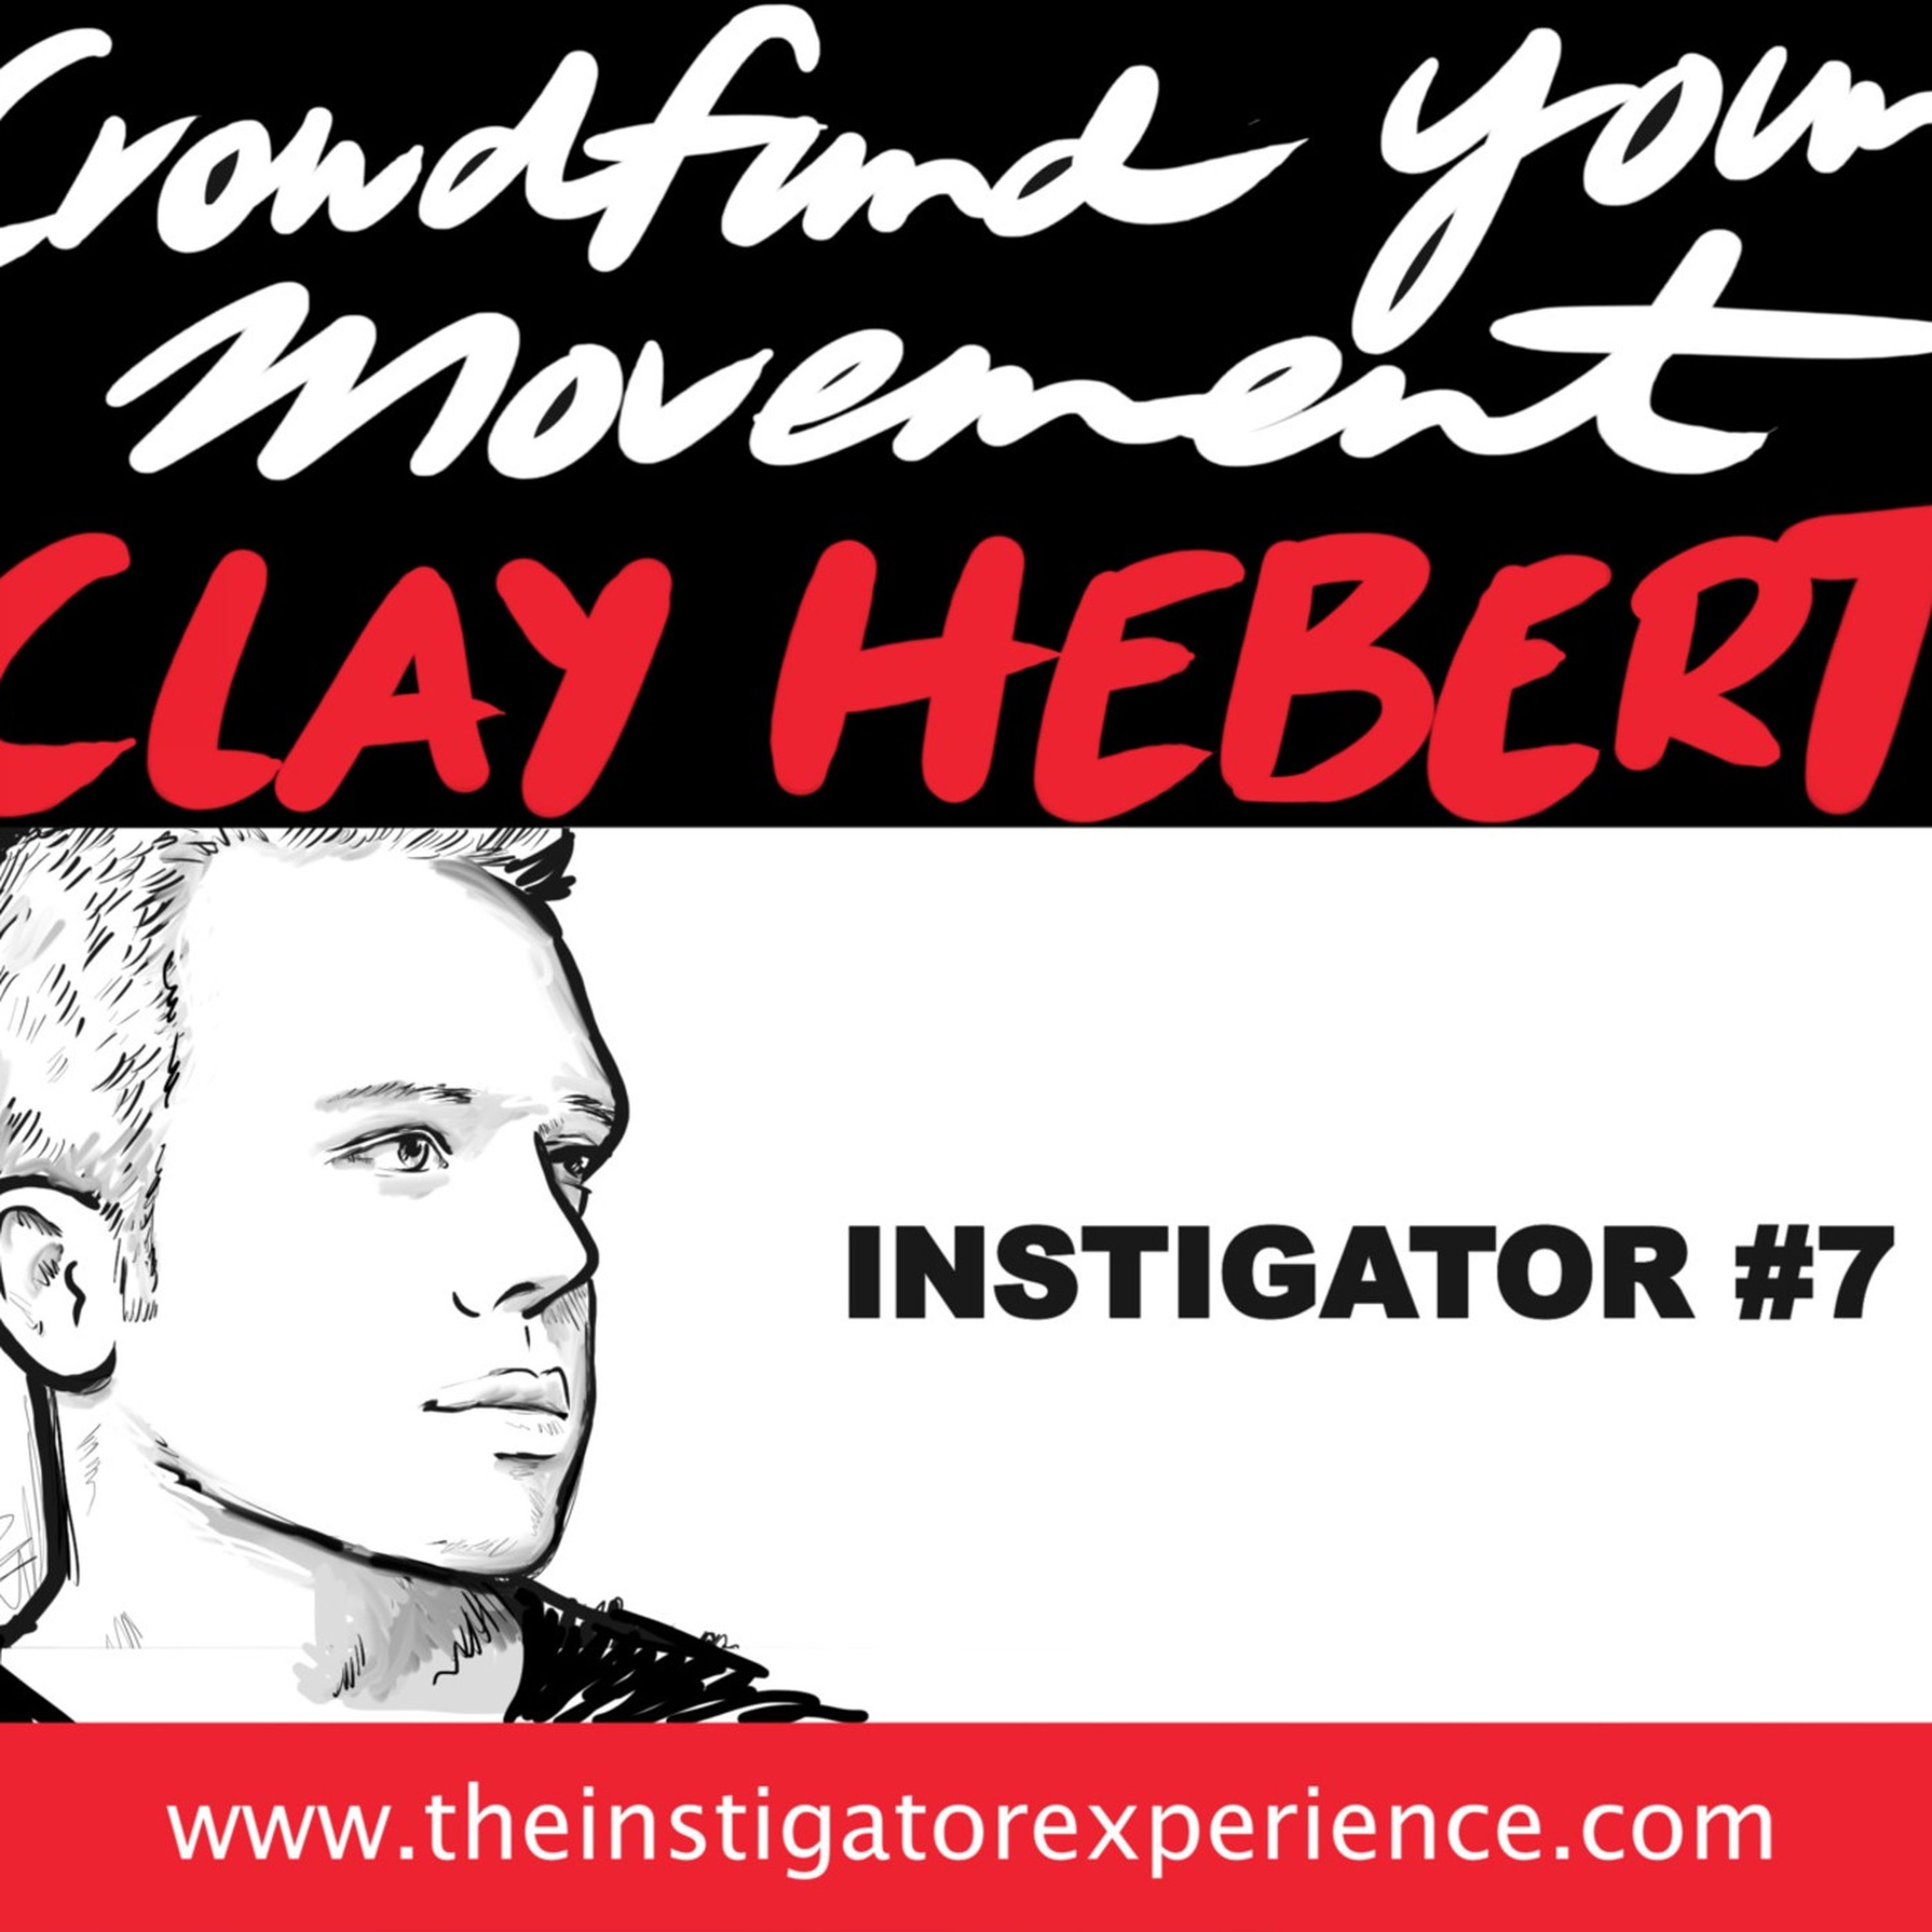 Crowdfunding Your Dreams with Clay Hebert